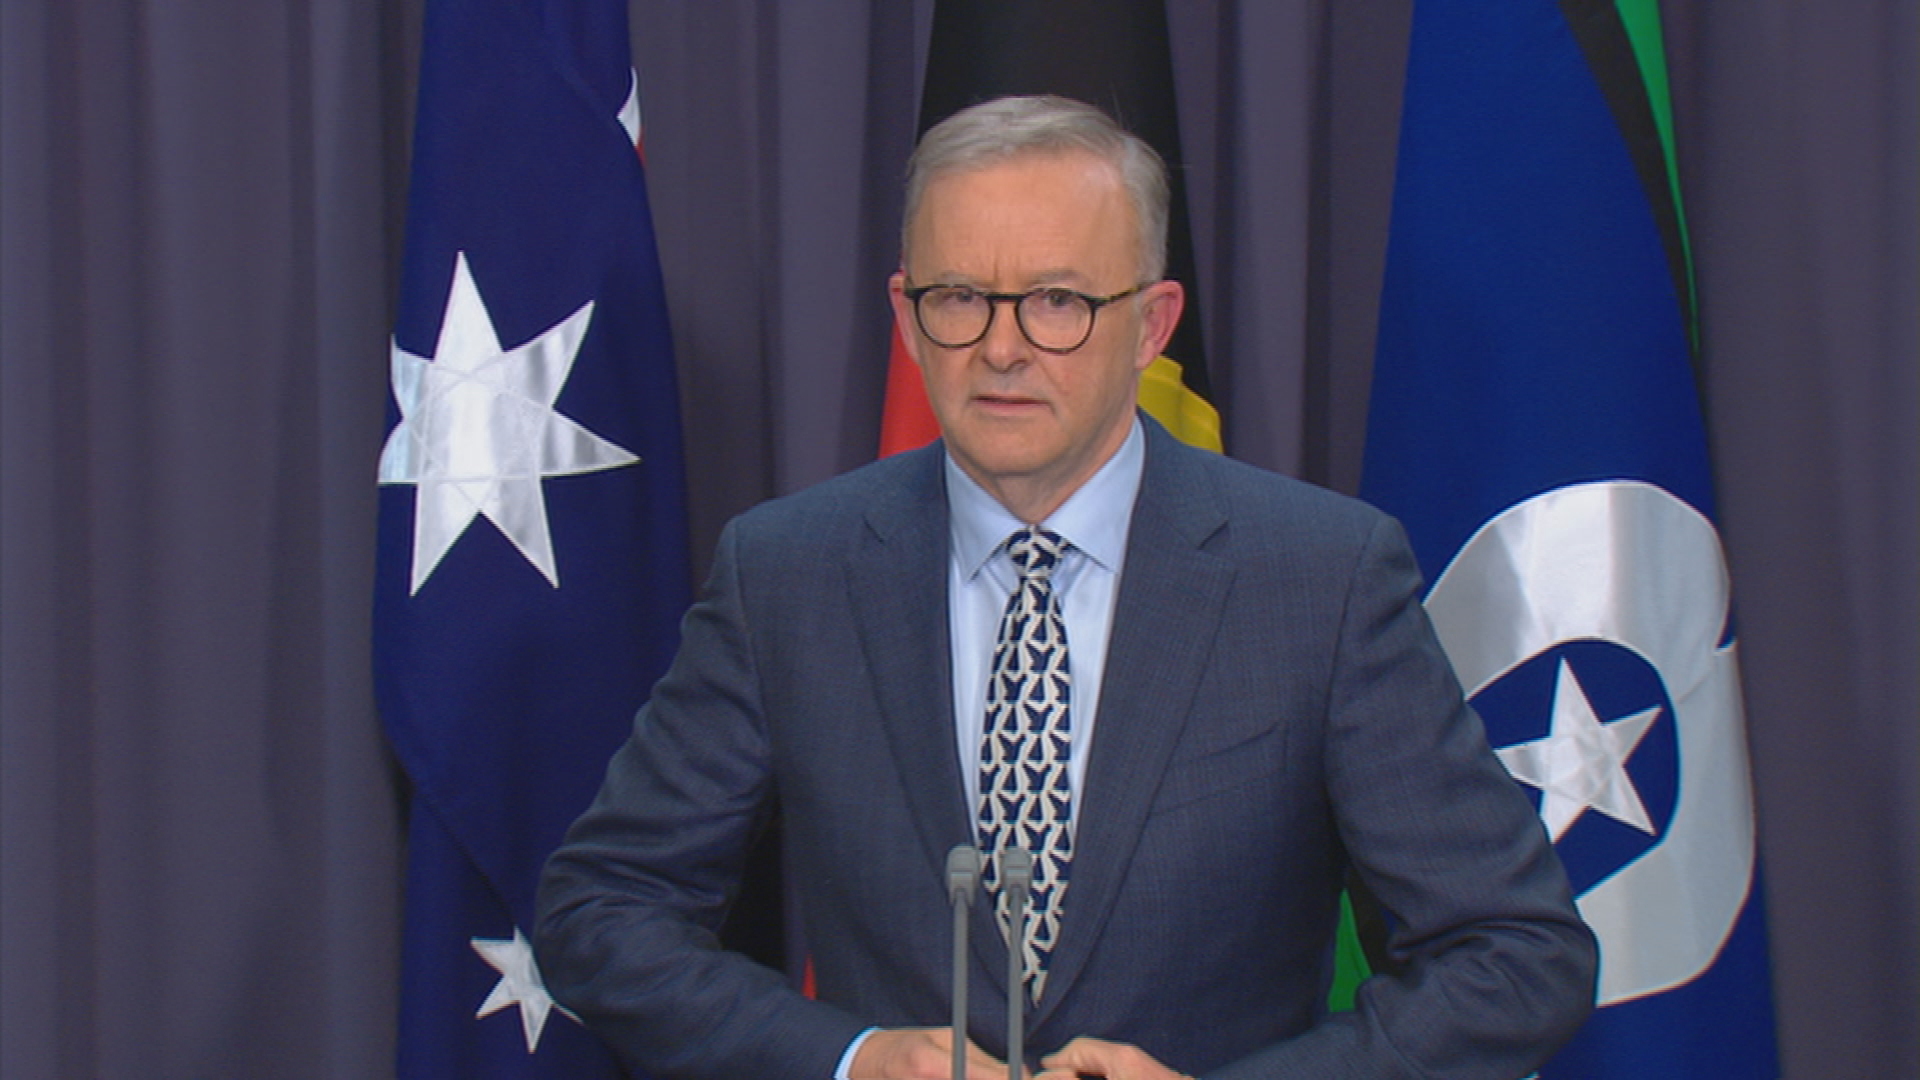 Prime Minister Anthony Albanese has revealed who will be a part of his new cabinet.